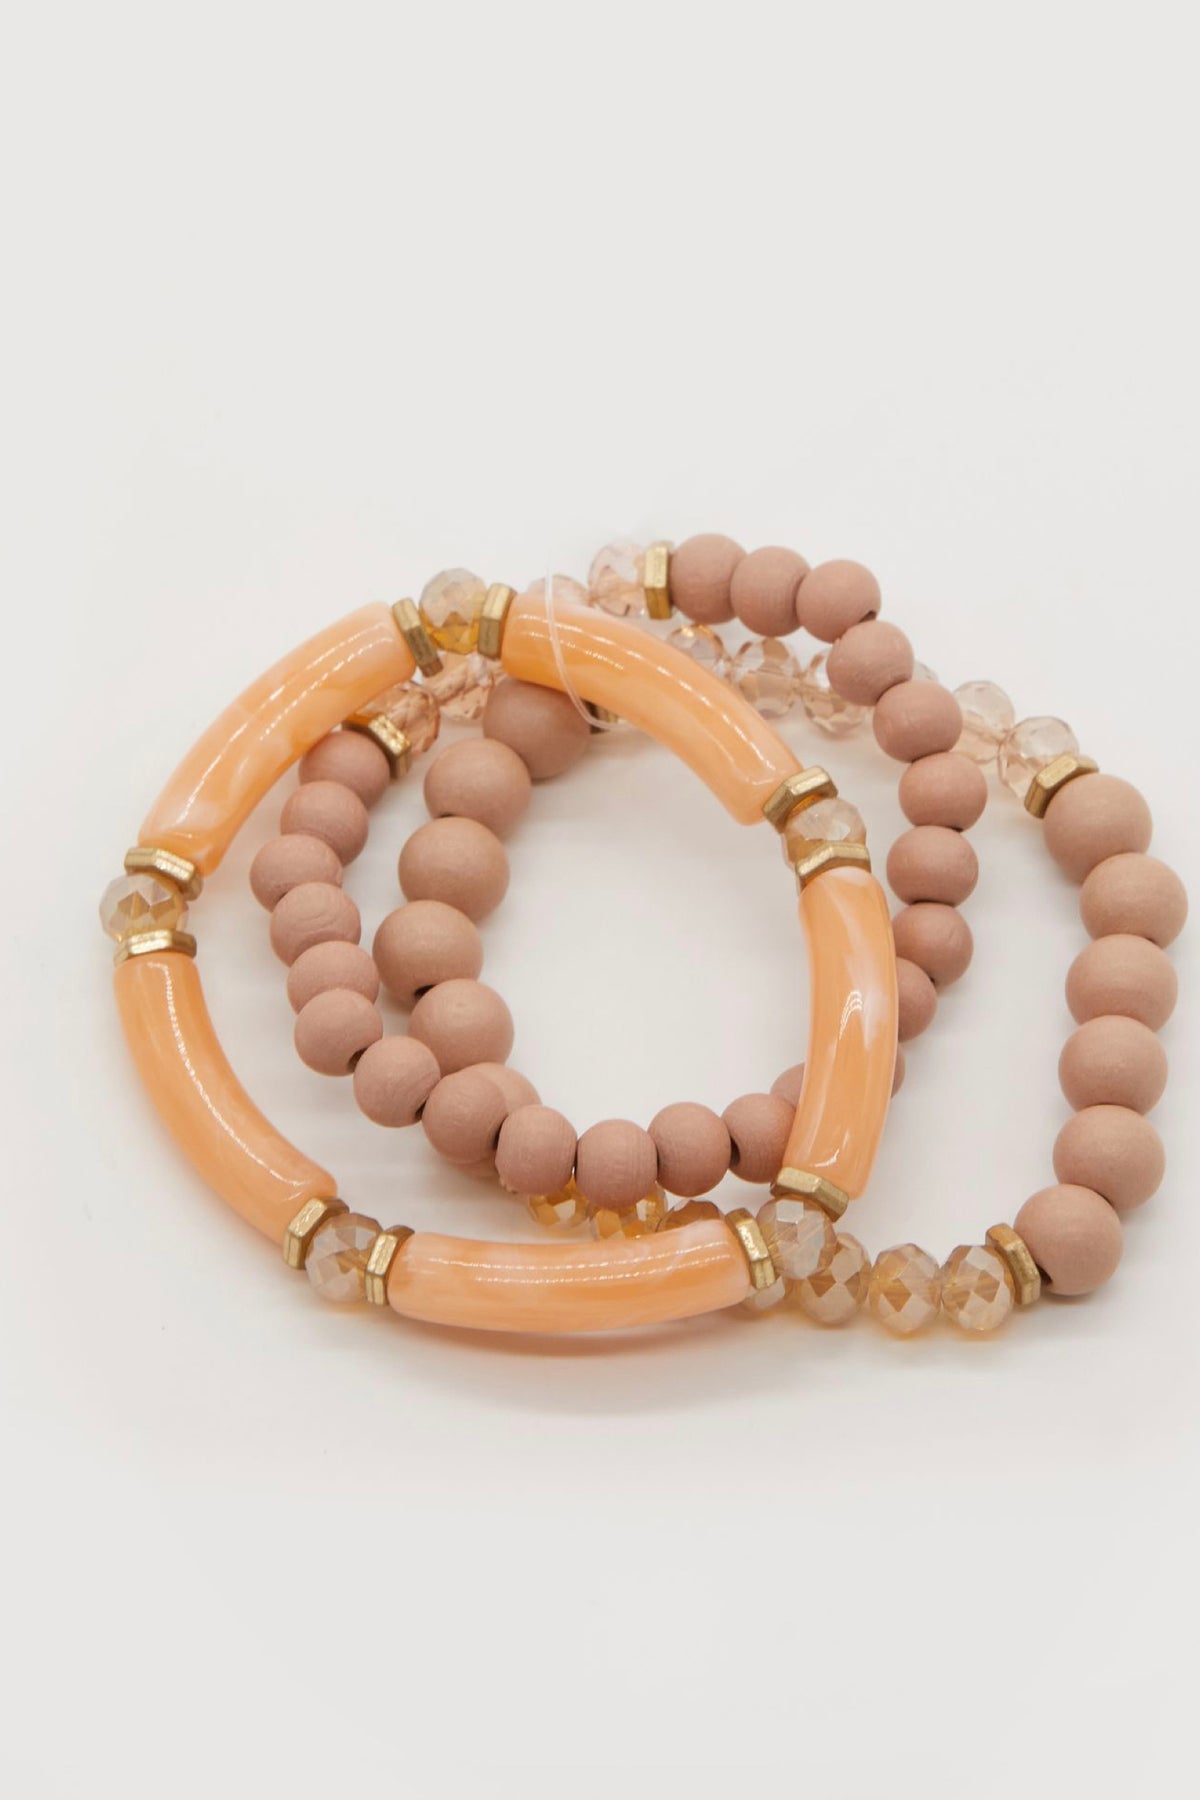 Rose Beads Wood and Resin Bracelets- Set of 3